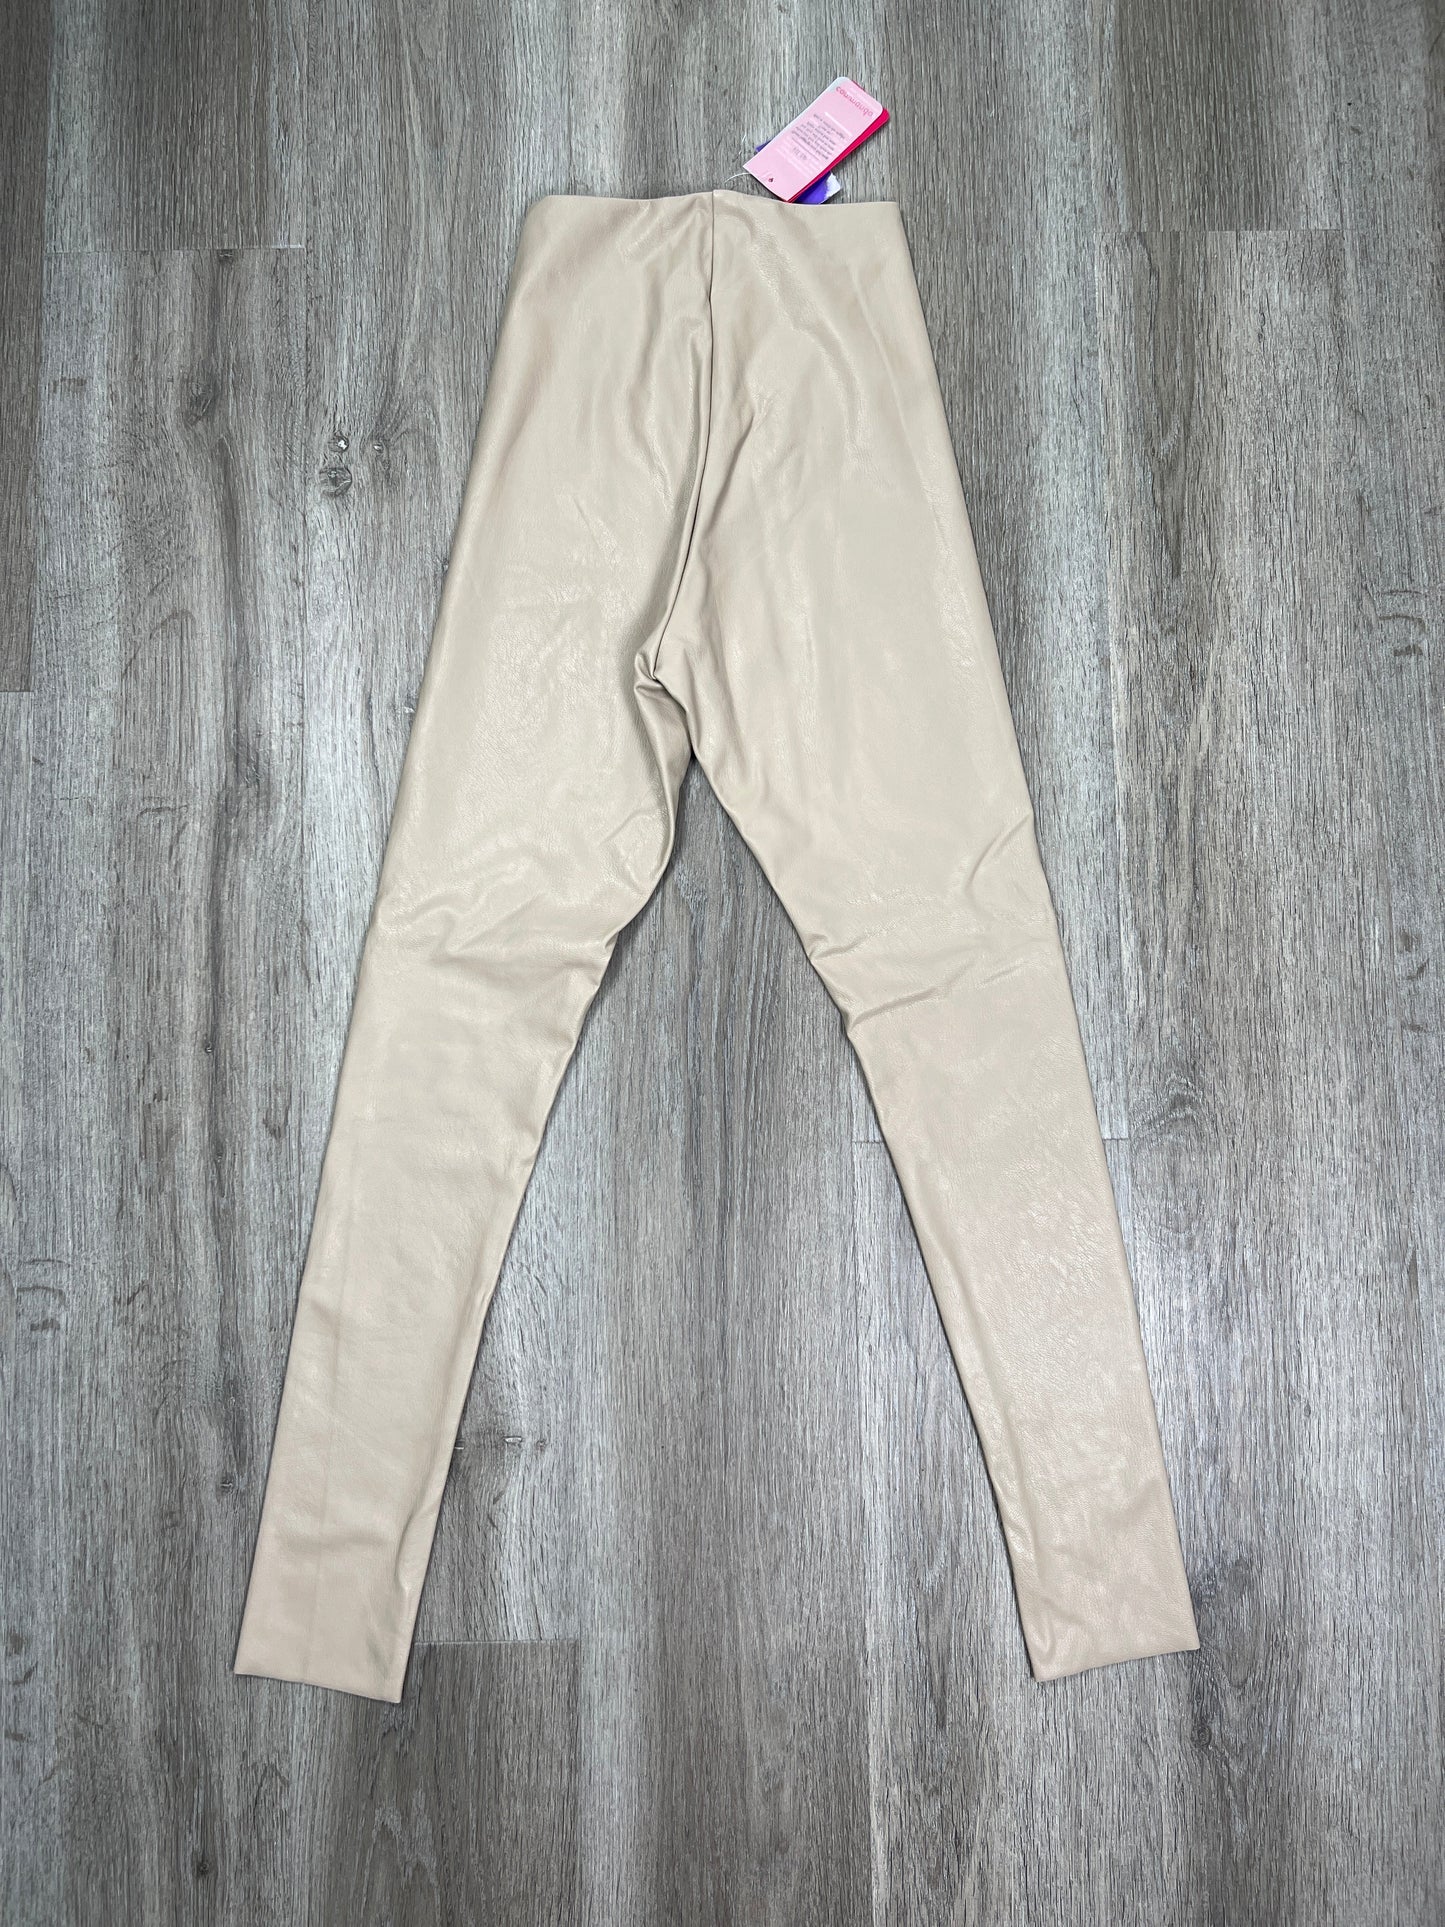 Tan Pants Other Commando, Size S